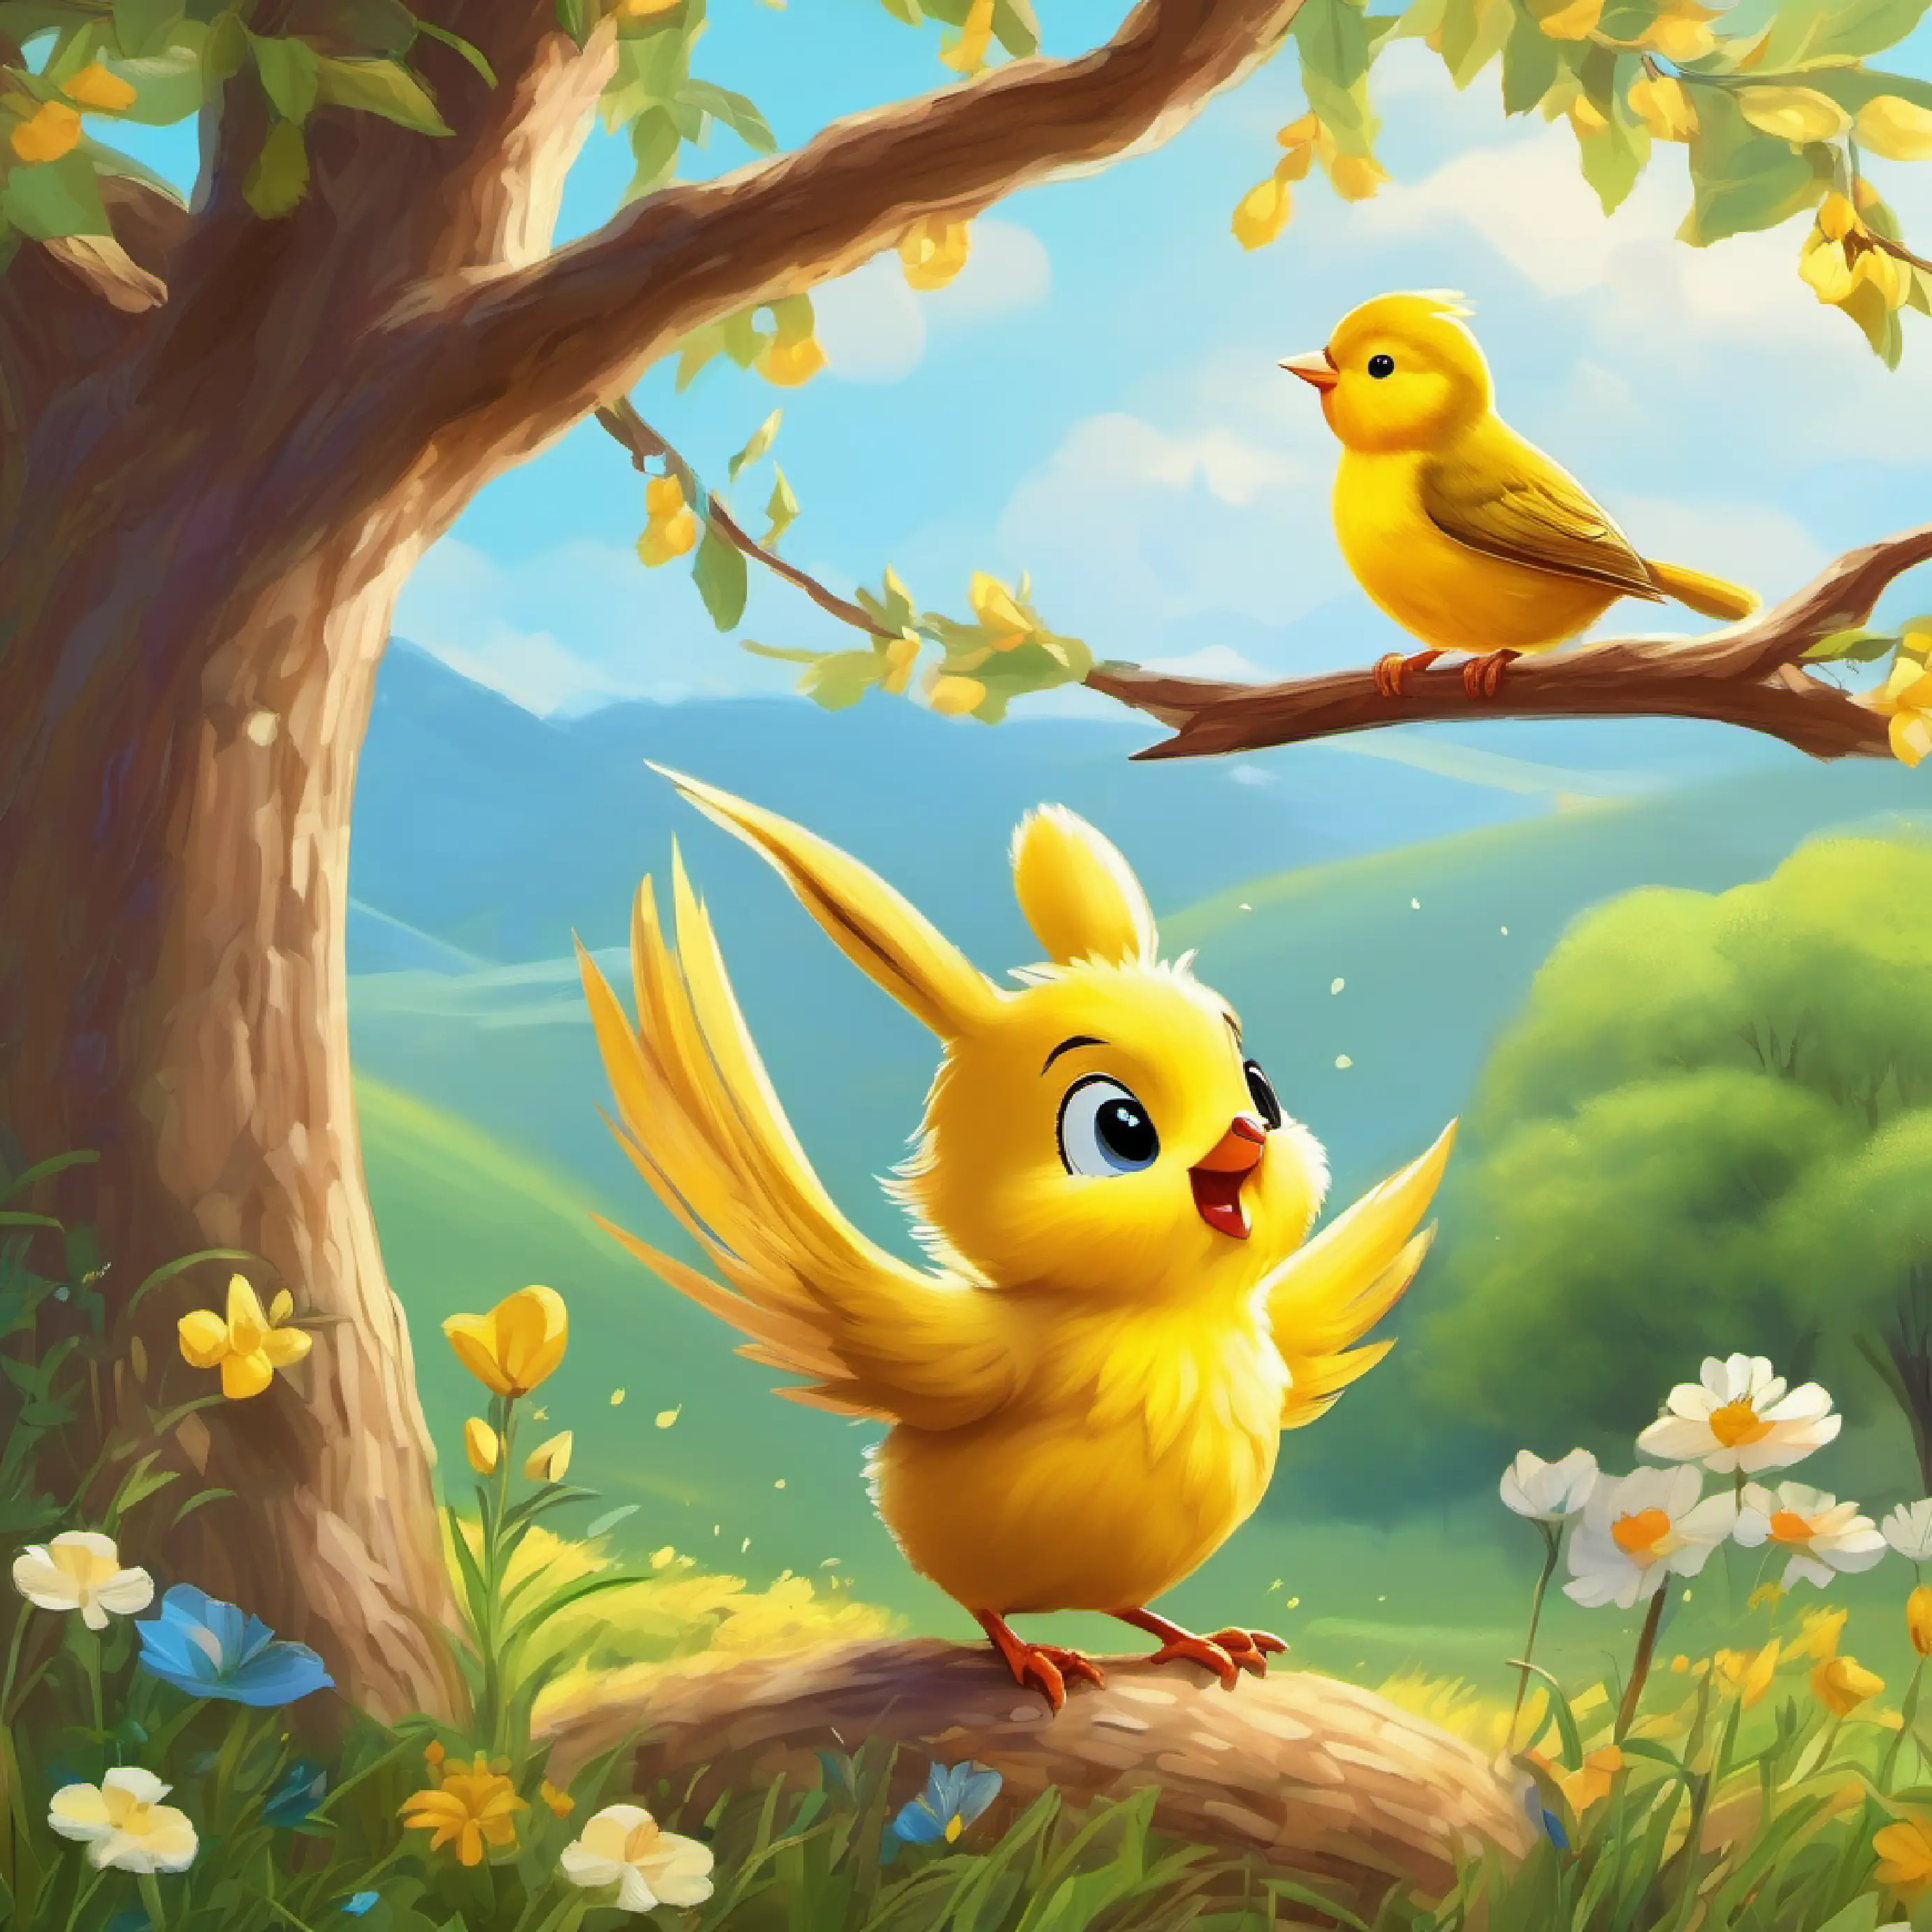 Tweetie yellow bird singing on a tree and brown rabbit listening in a meadow in spring